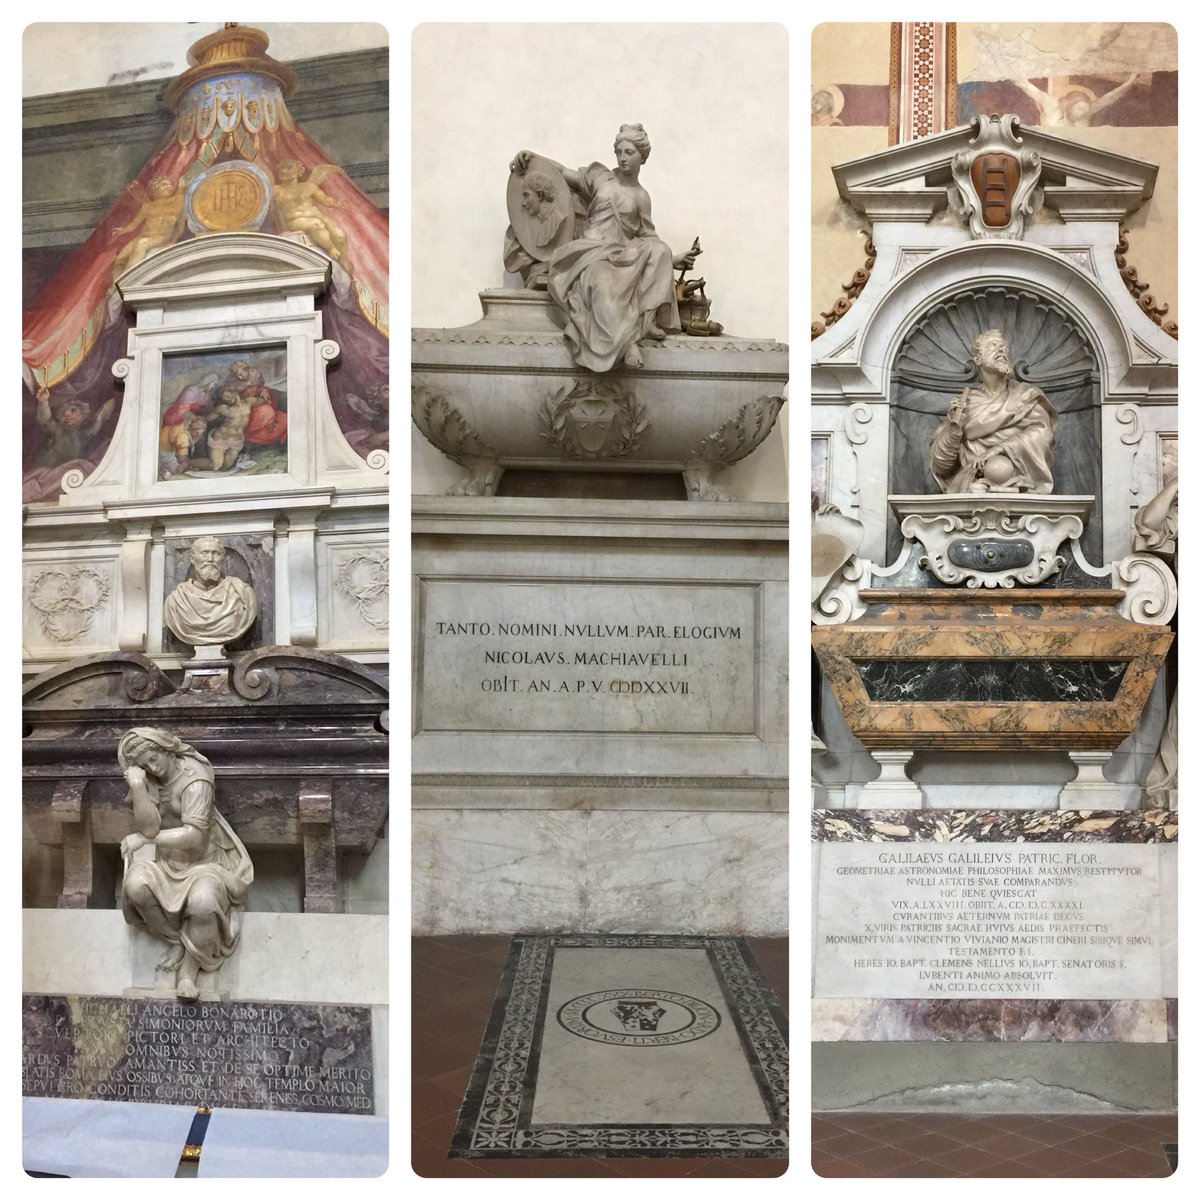 Visited the graves of Michelangelo, Machiavelli & Galileo at the church of Santa Croce. 3 KINGS! #santacroce #cattedrale #cathedral #church #firenze #florence #instaflorence #yourflorence #toscana #tuscany #italia #italy #italian #michelangelo #machiavelli #galileo #europa